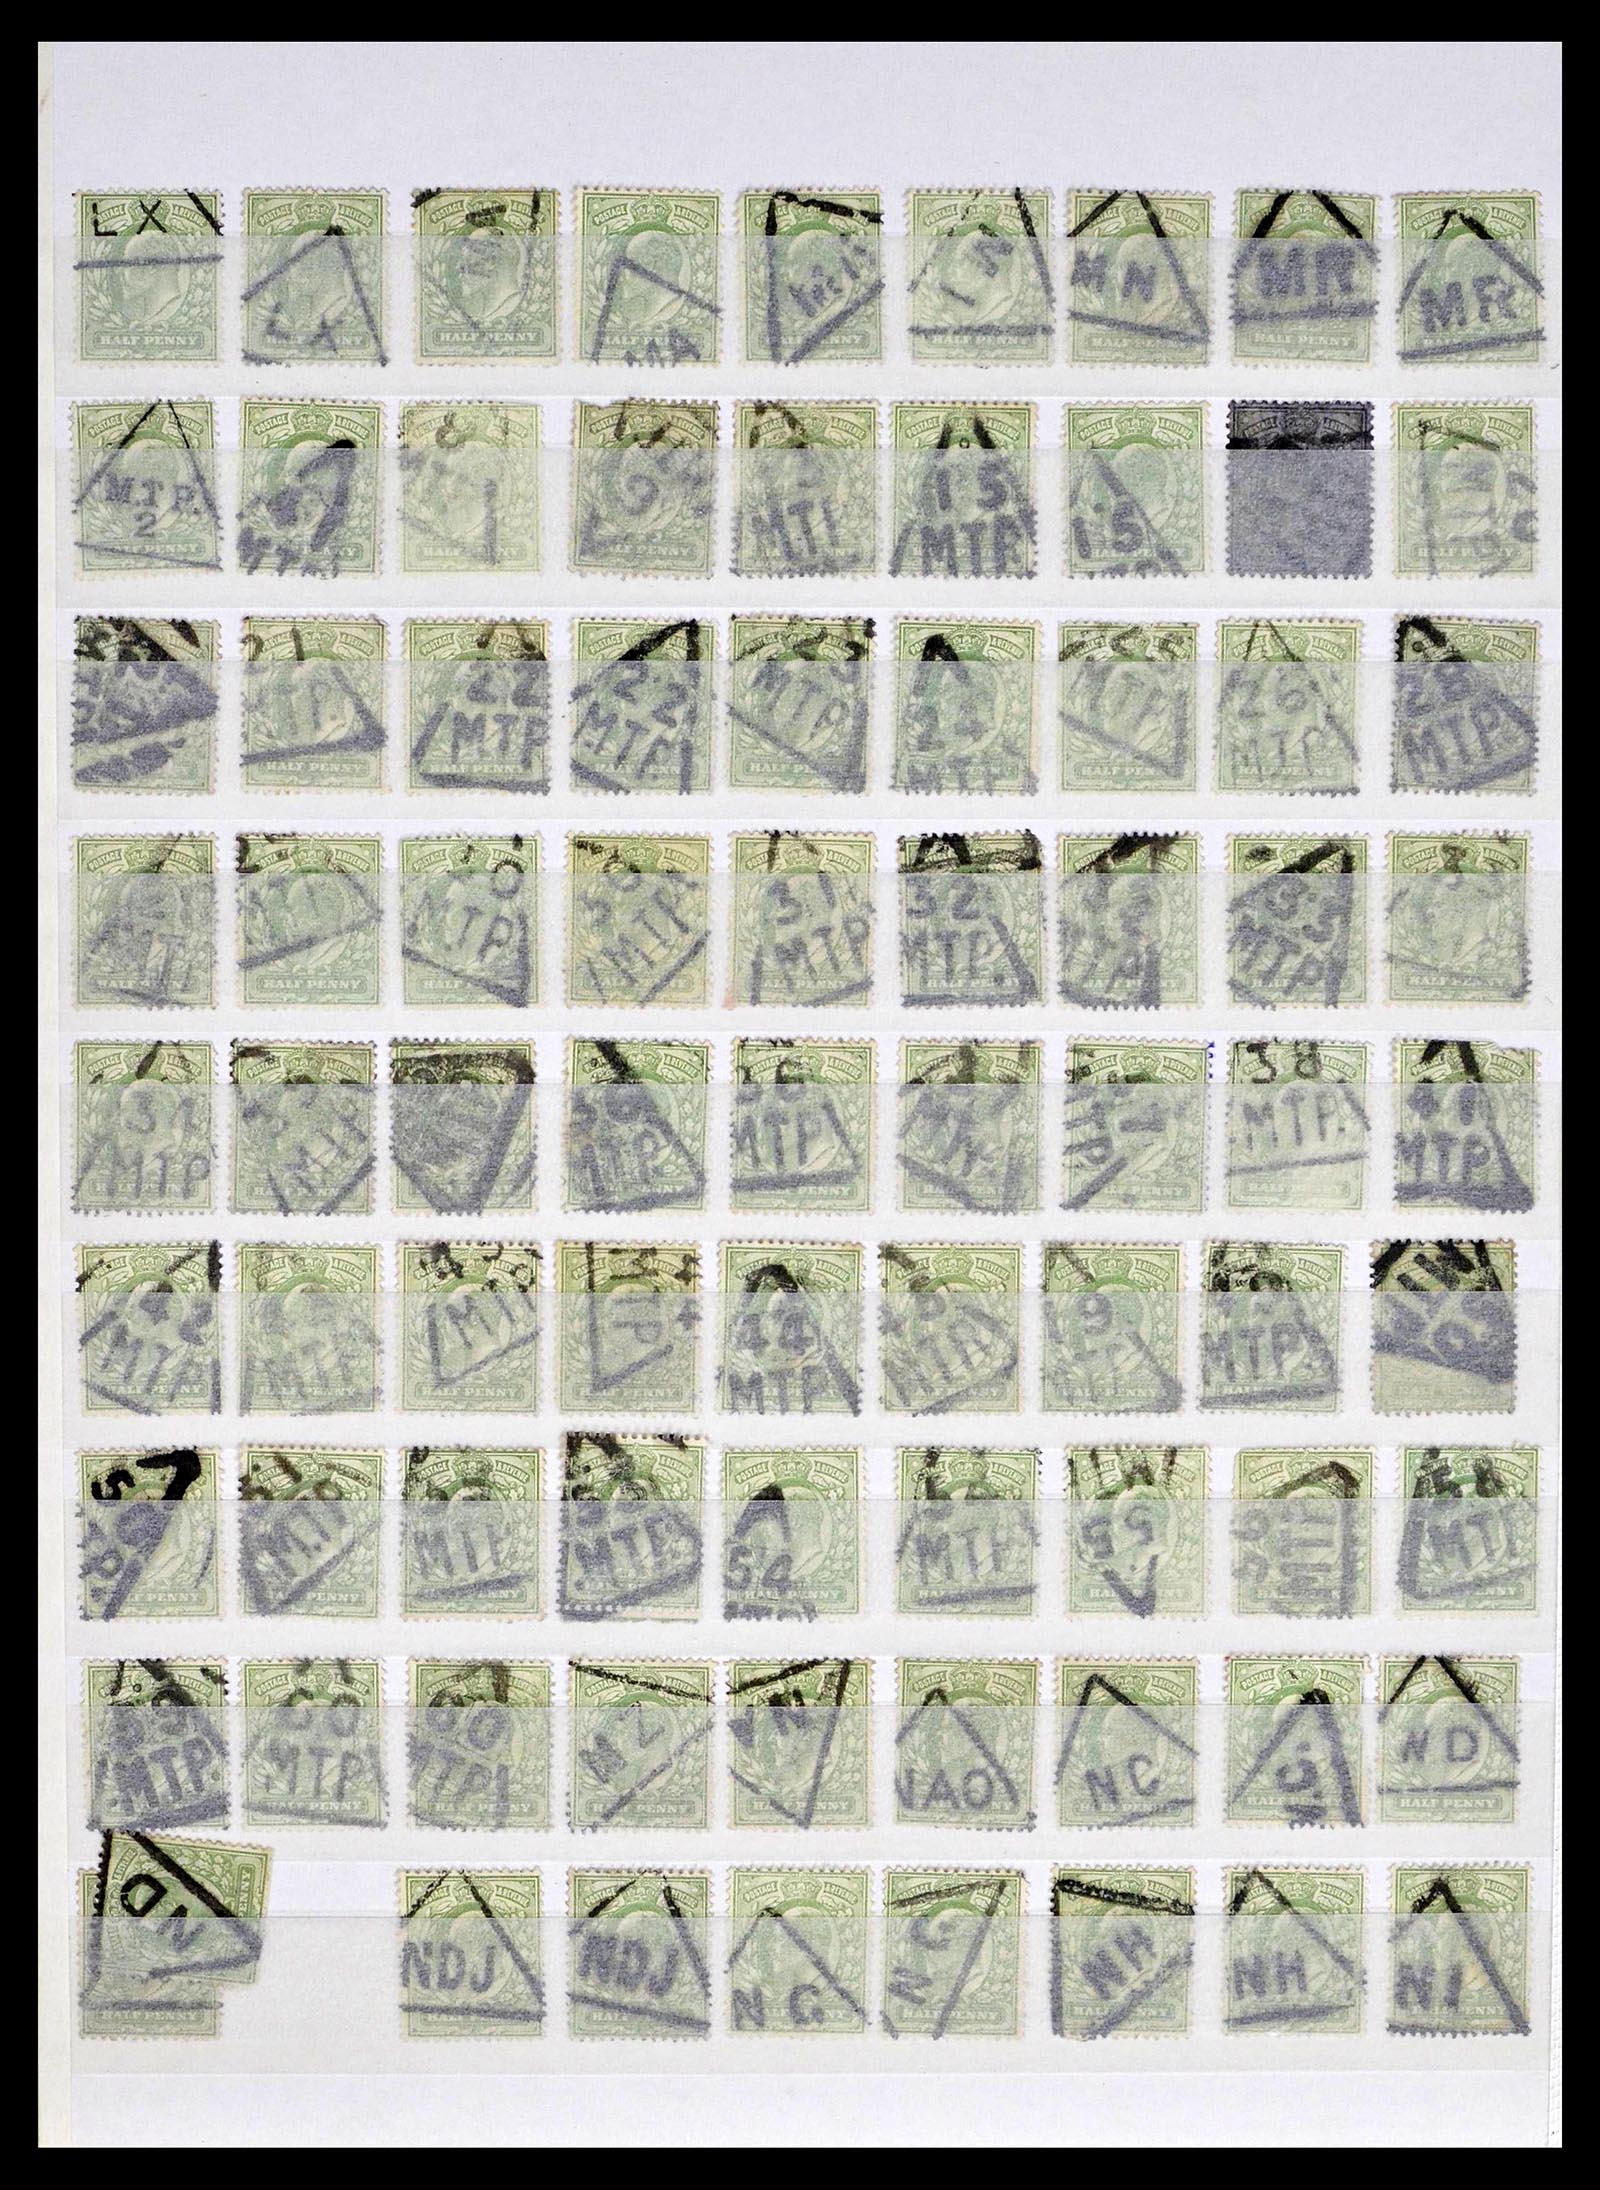 39196 0102 - Stamp collection 39196 Great Britain 1844-1955.